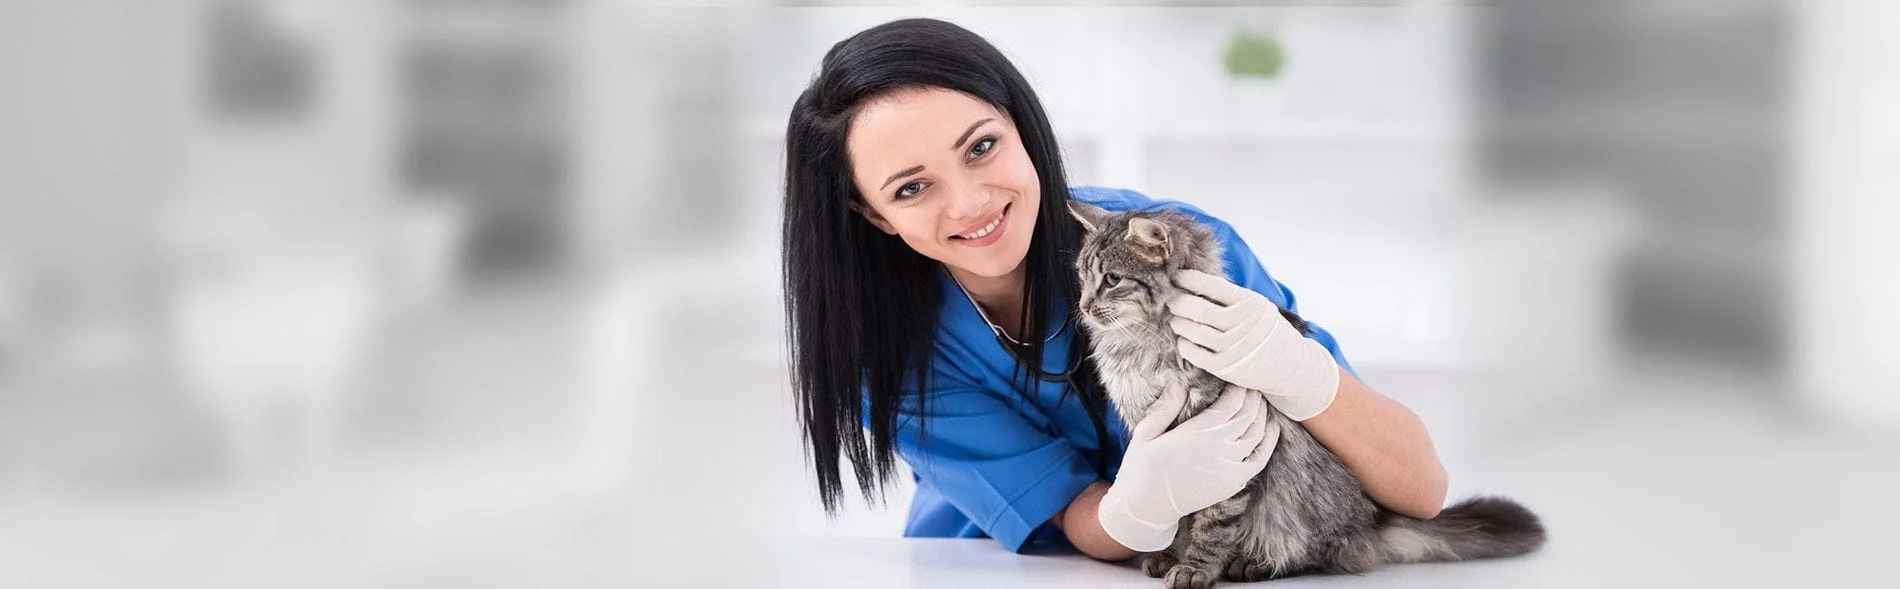 Pet Anesthesia Services from Your Veterinarian in San Jose, CA